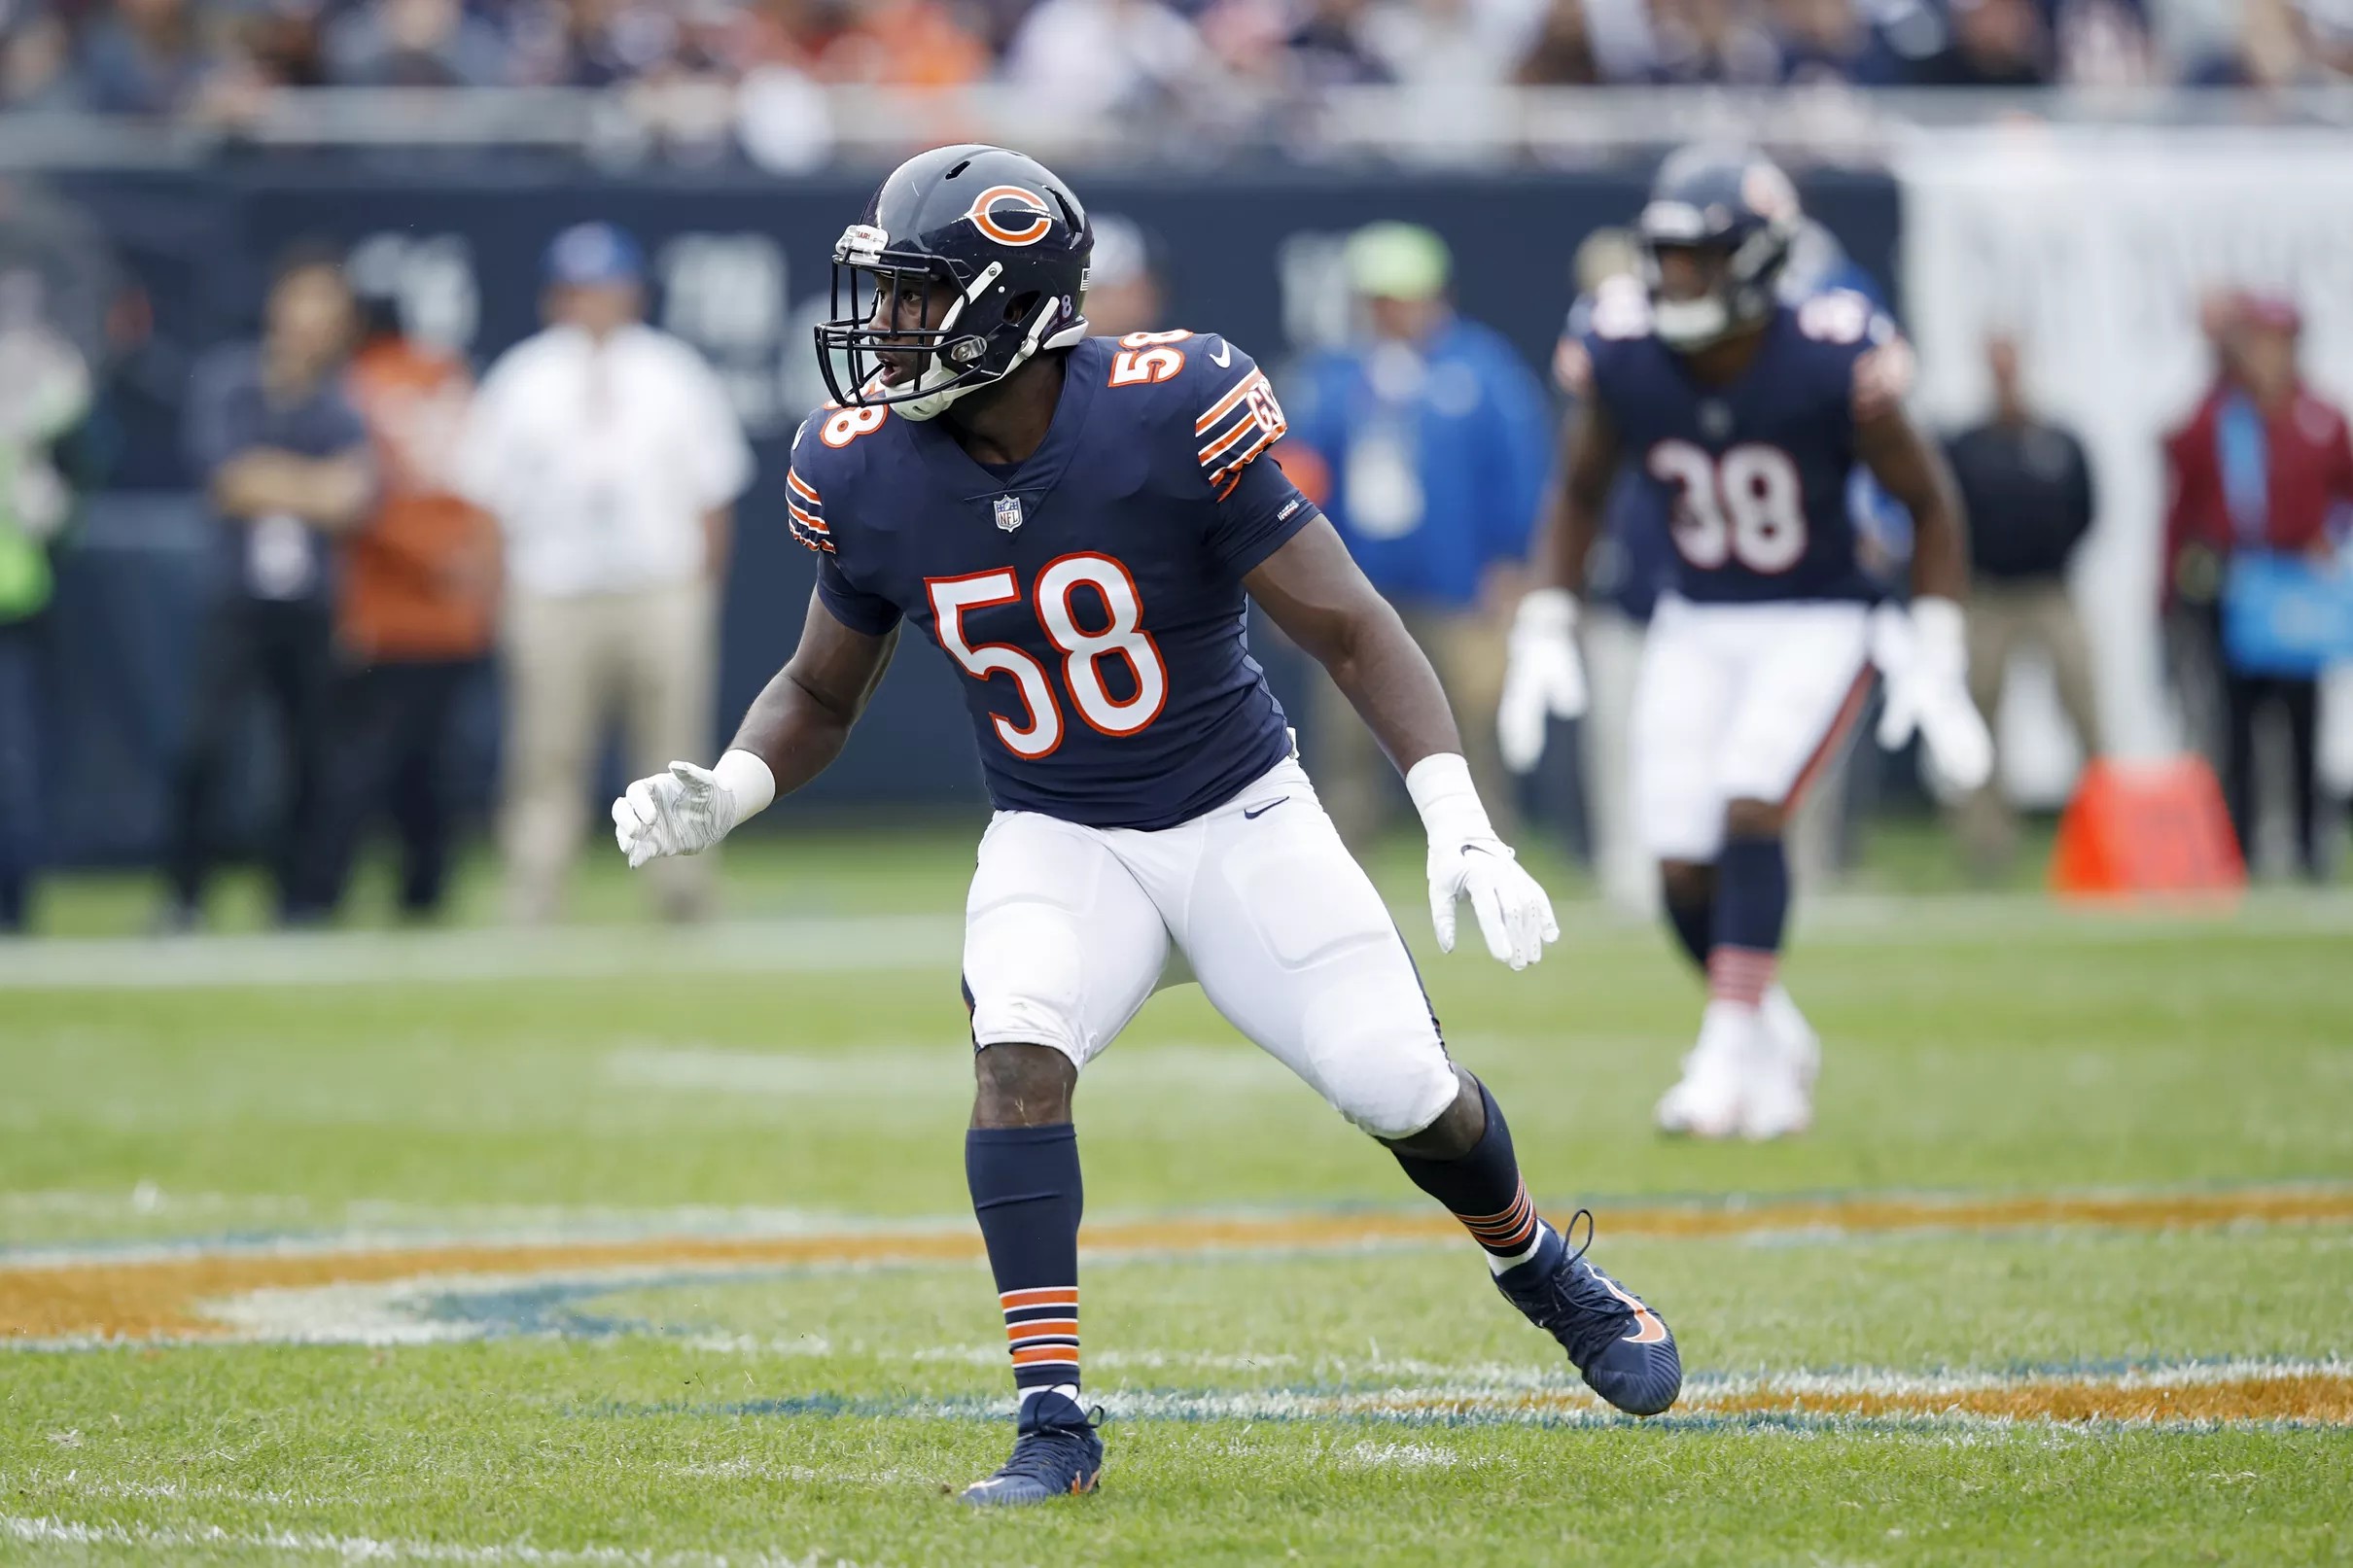 Are there any firsttime Pro Bowlers on the Bears this year?